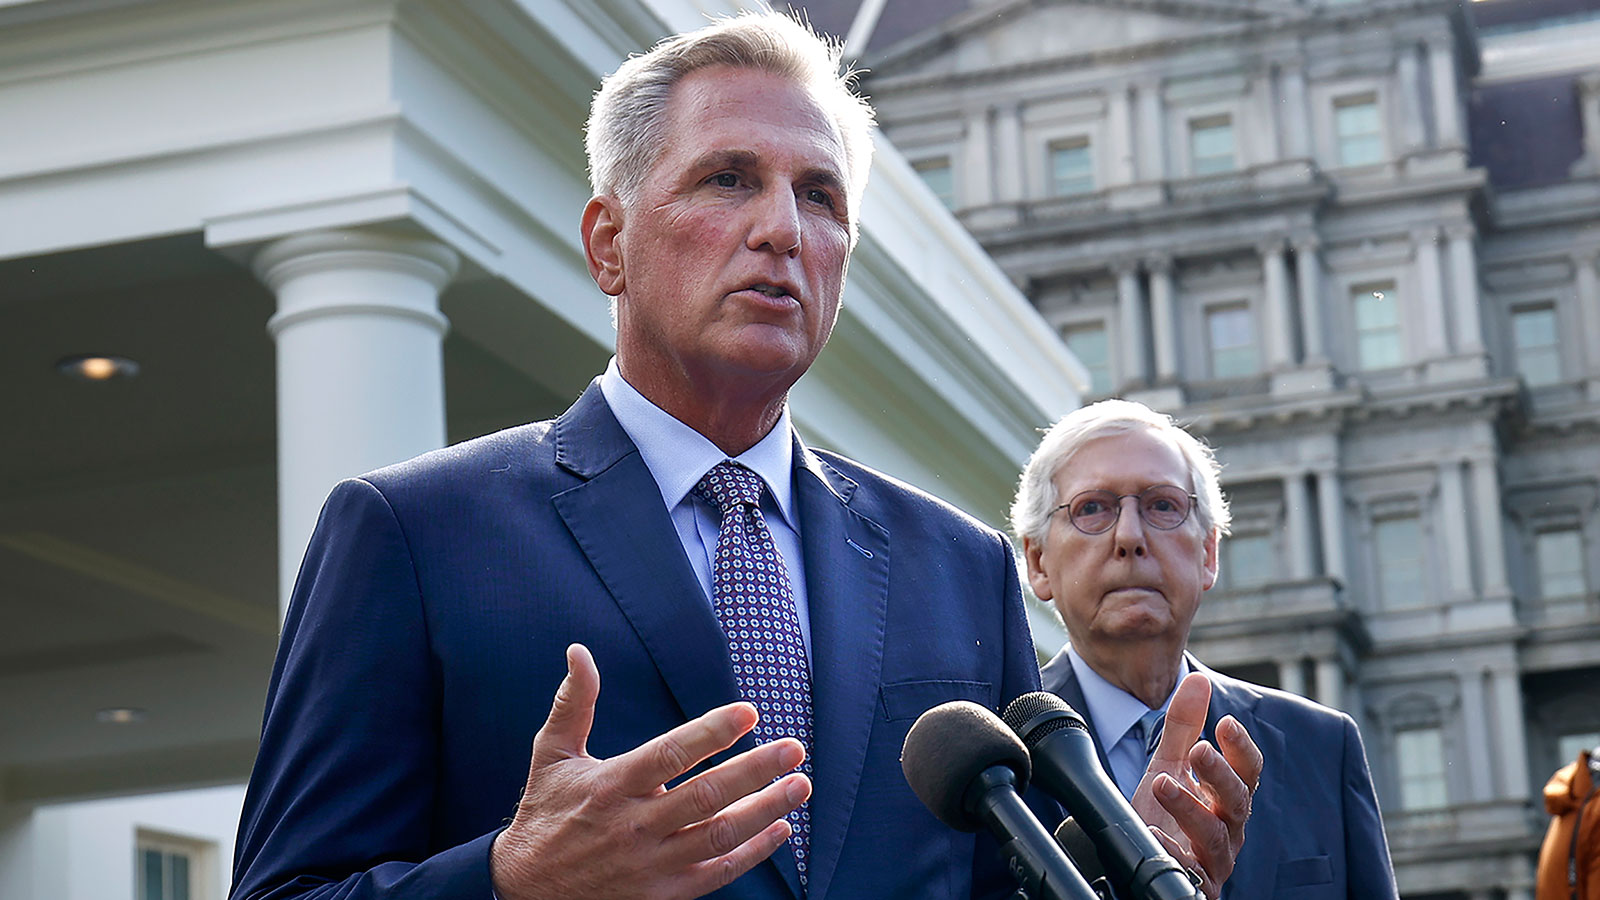 McCarthy and Mitch McConnell speak to the media after meeting with President Joe Biden at the White House on May 09. 